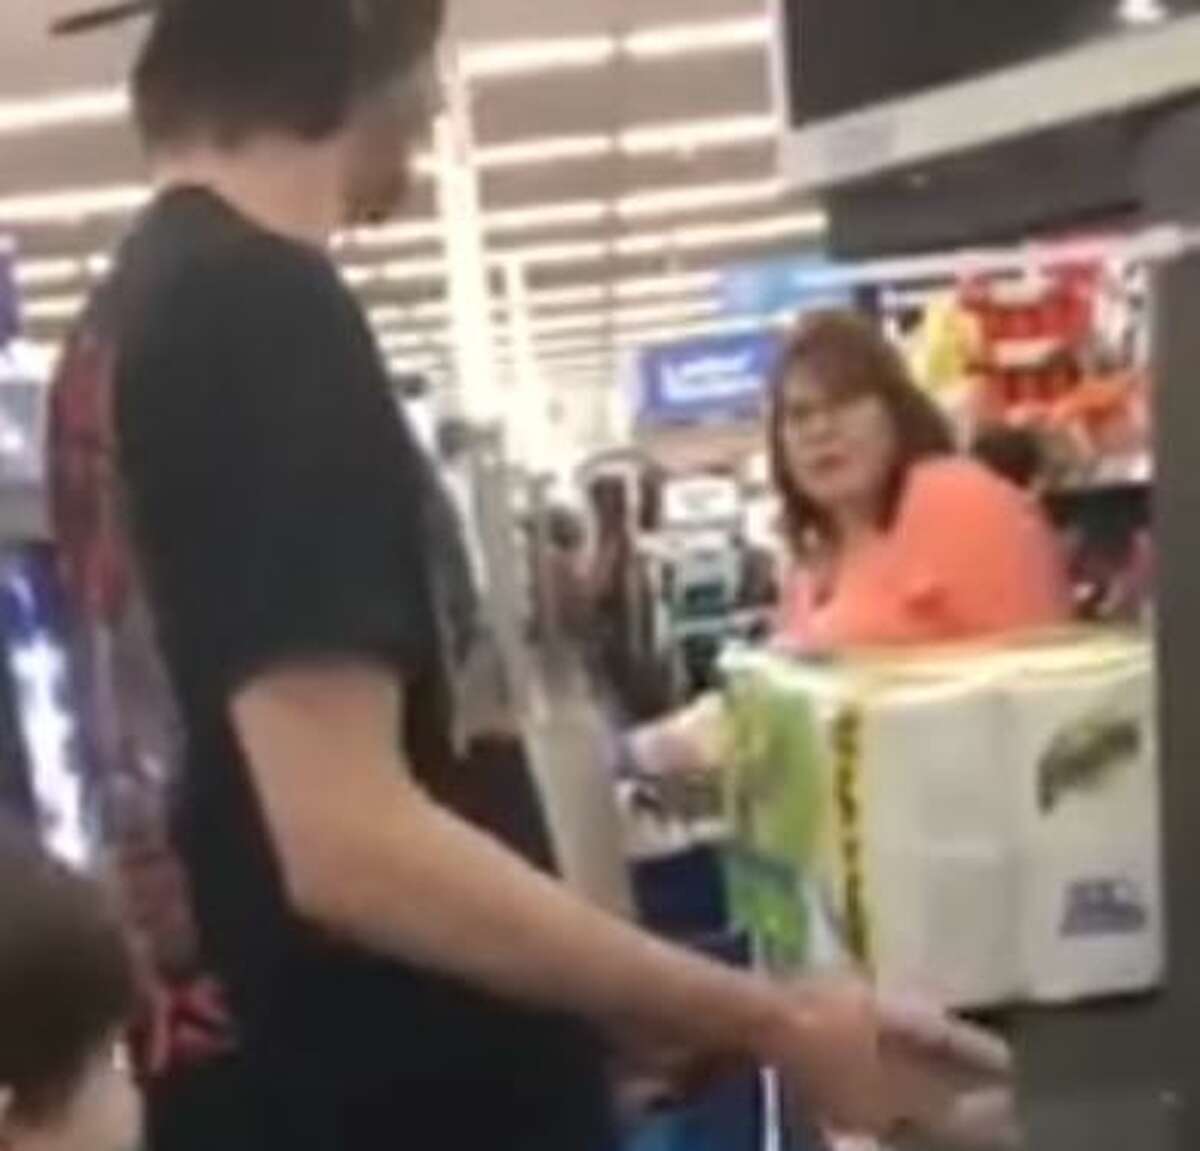 Woman Gets In War Of Words With Man At Wal Mart For Using Food Stamps